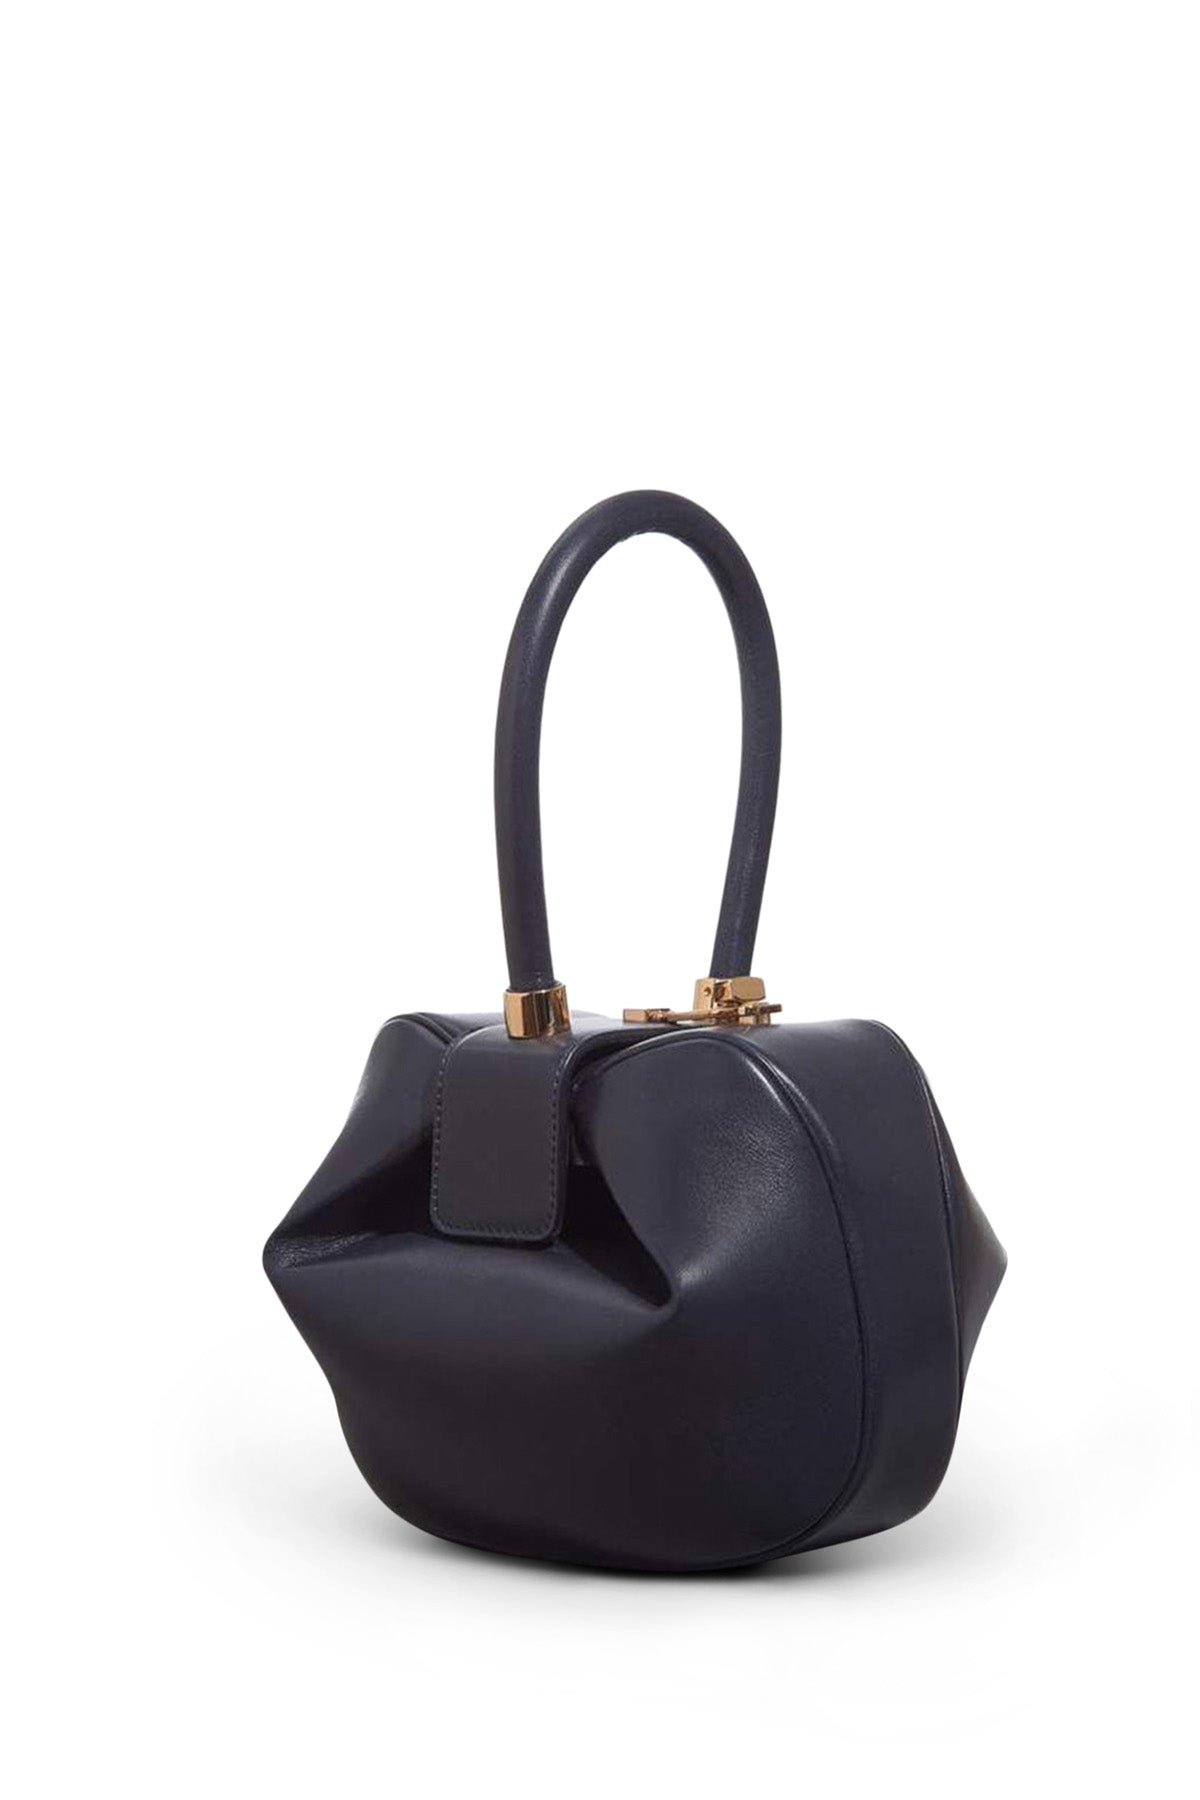 Gabriela Hearst Nina Bag in Navy Leather — UFO No More